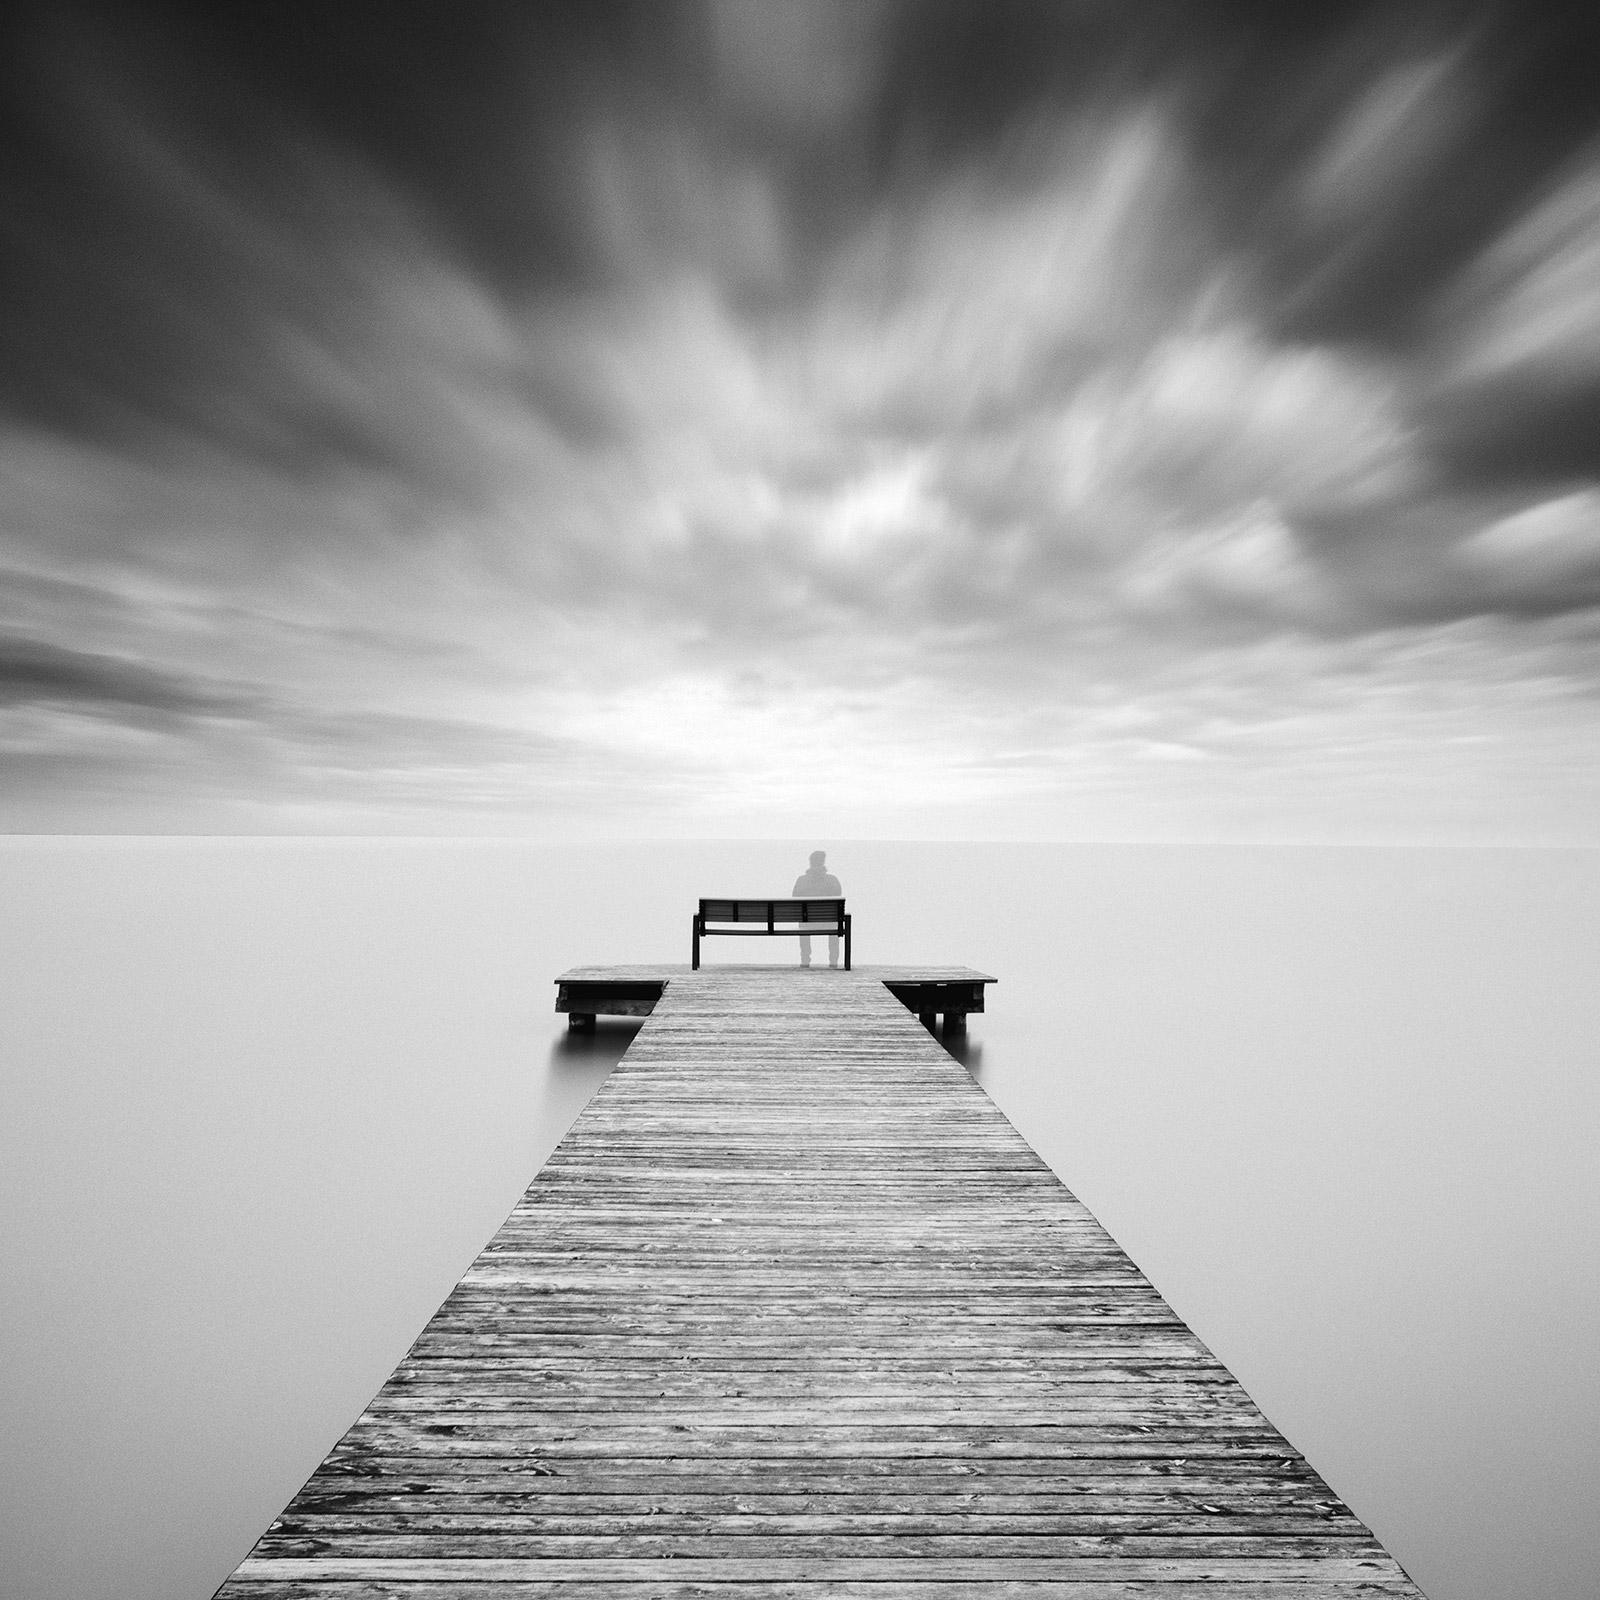 Gerald Berghammer Landscape Photograph - Self Portrait, lake, storm, black and white long exposure waterscape photography